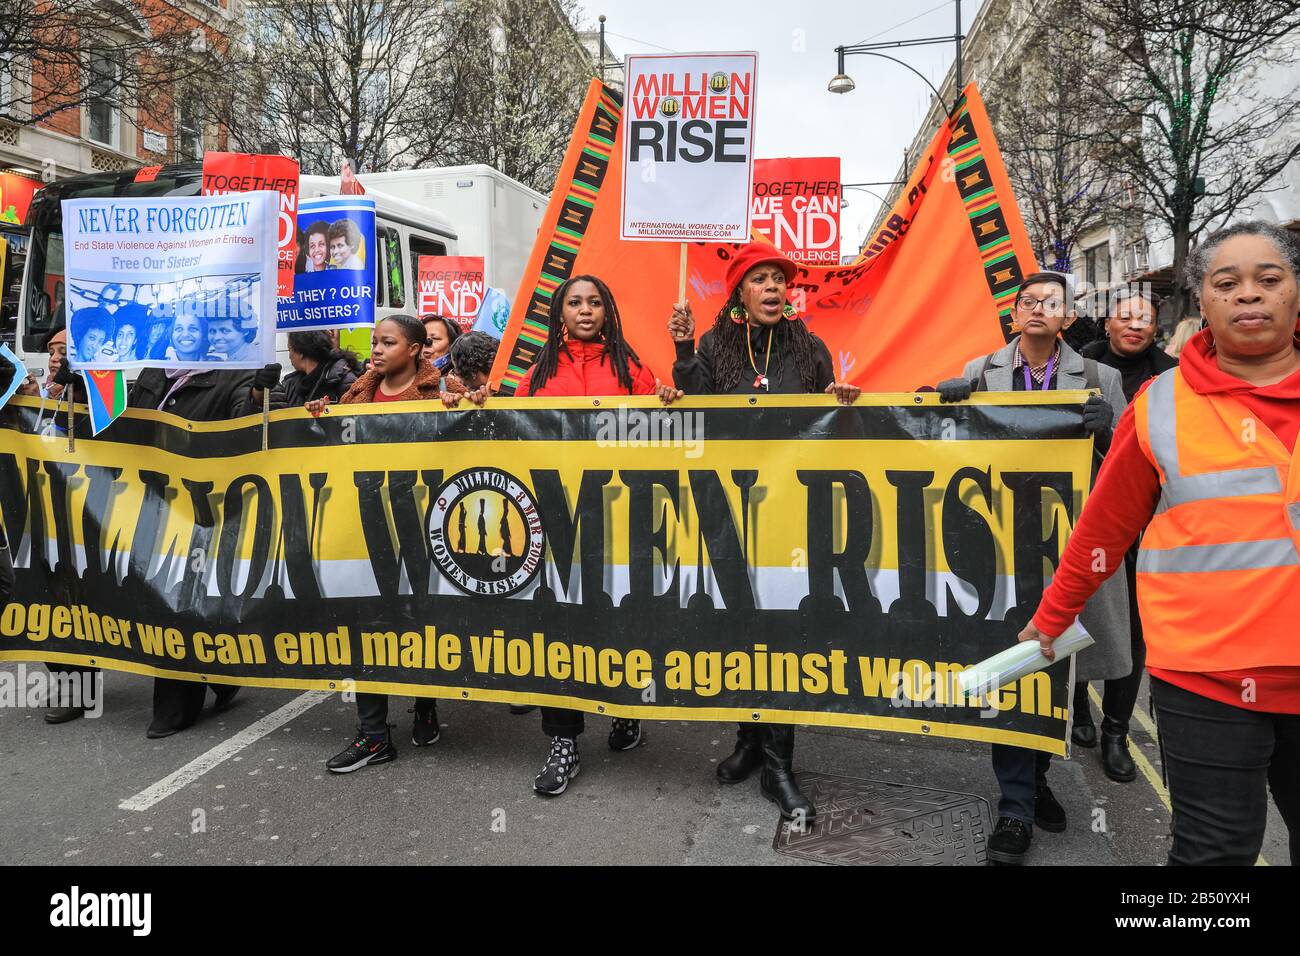 London, UK. 7th Mar, 2020. Thousands of women from all walks of life once again unite to march from Oxford Street to Trafalgar Square to highlight and end male violence against women and girls in the UK and globally. The march is organised by The Million Women Rise Coalition with support from many local ethnic communities. Credit: Imageplotter/Alamy Live News Stock Photo